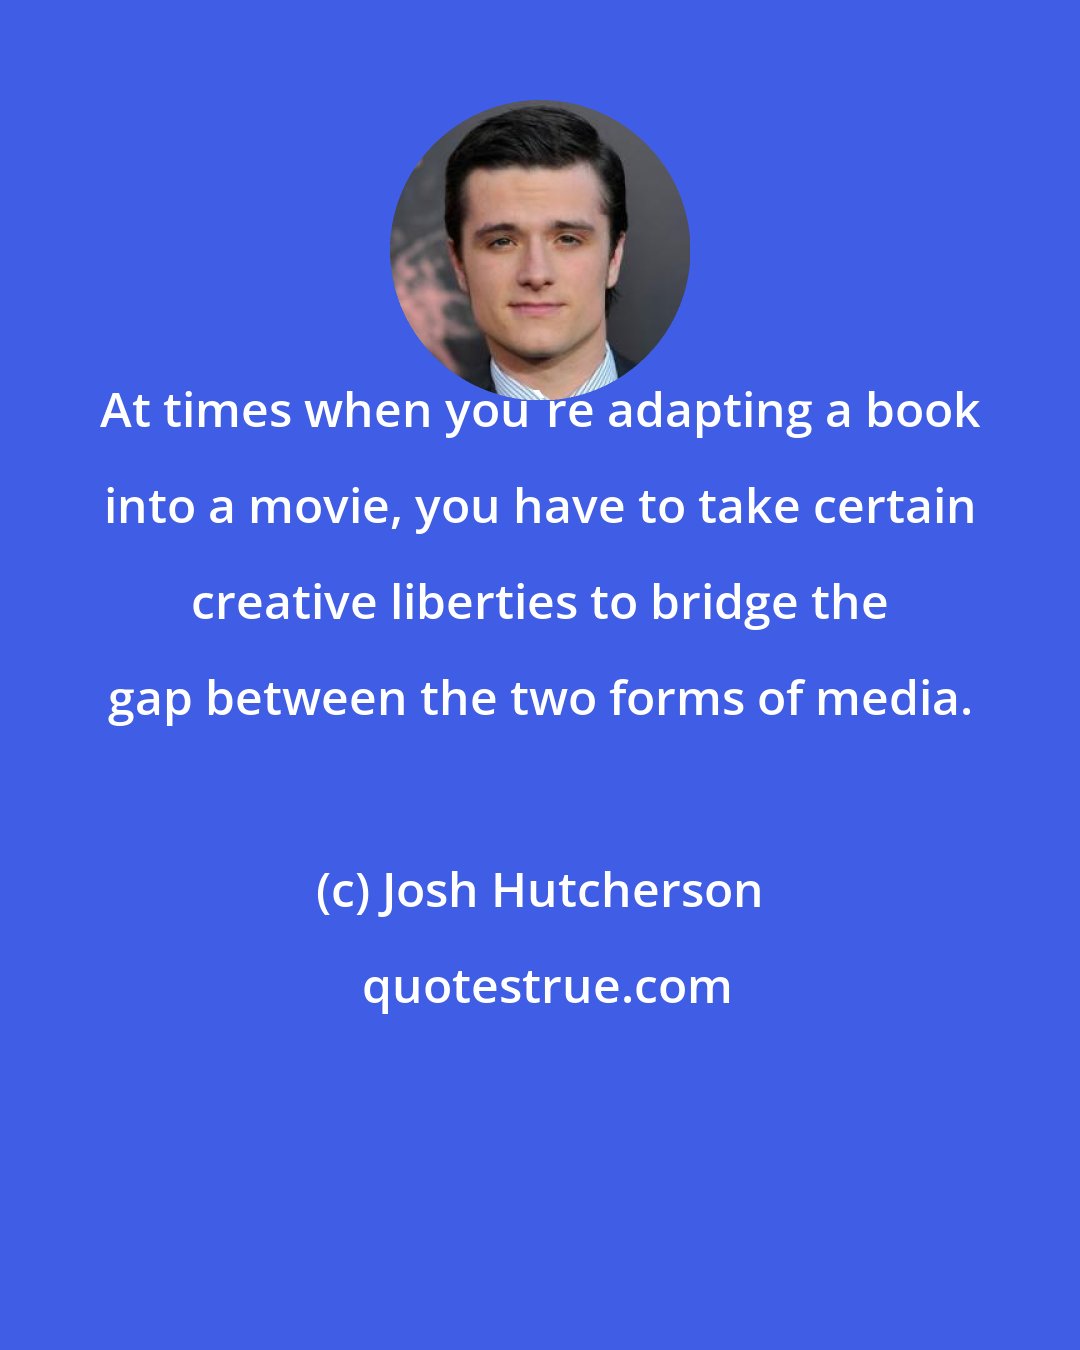 Josh Hutcherson: At times when you're adapting a book into a movie, you have to take certain creative liberties to bridge the gap between the two forms of media.